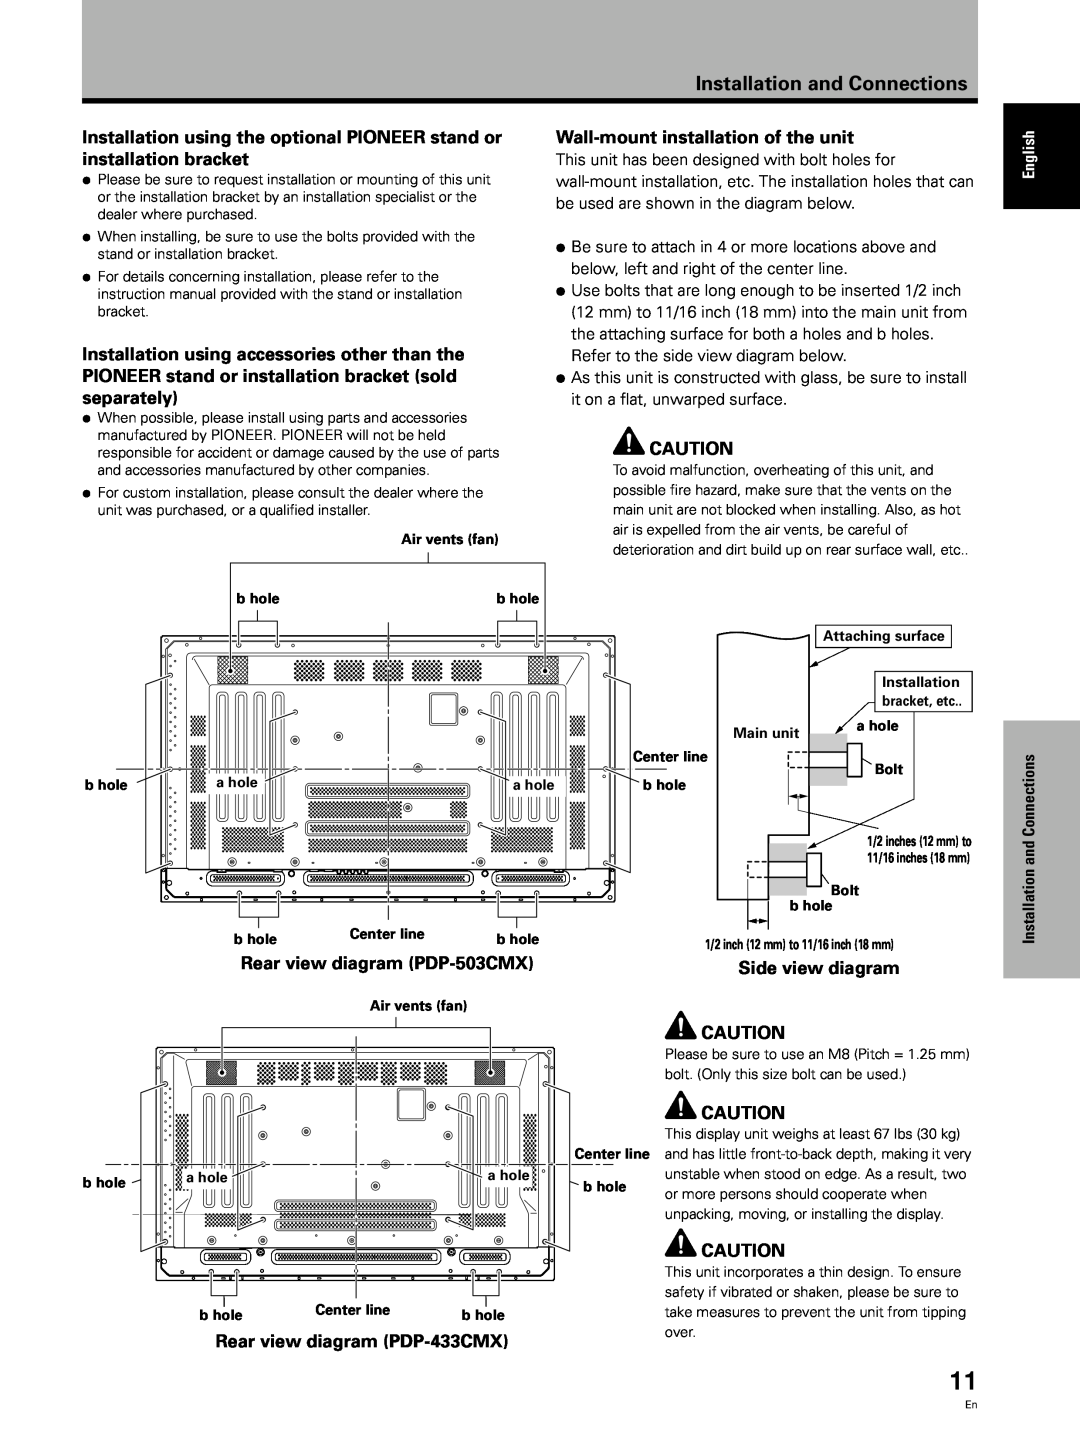 Pioneer PDP 433CMX Installation using the optional PIONEER stand or installation bracket, Rear view diagram PDP-503CMX 